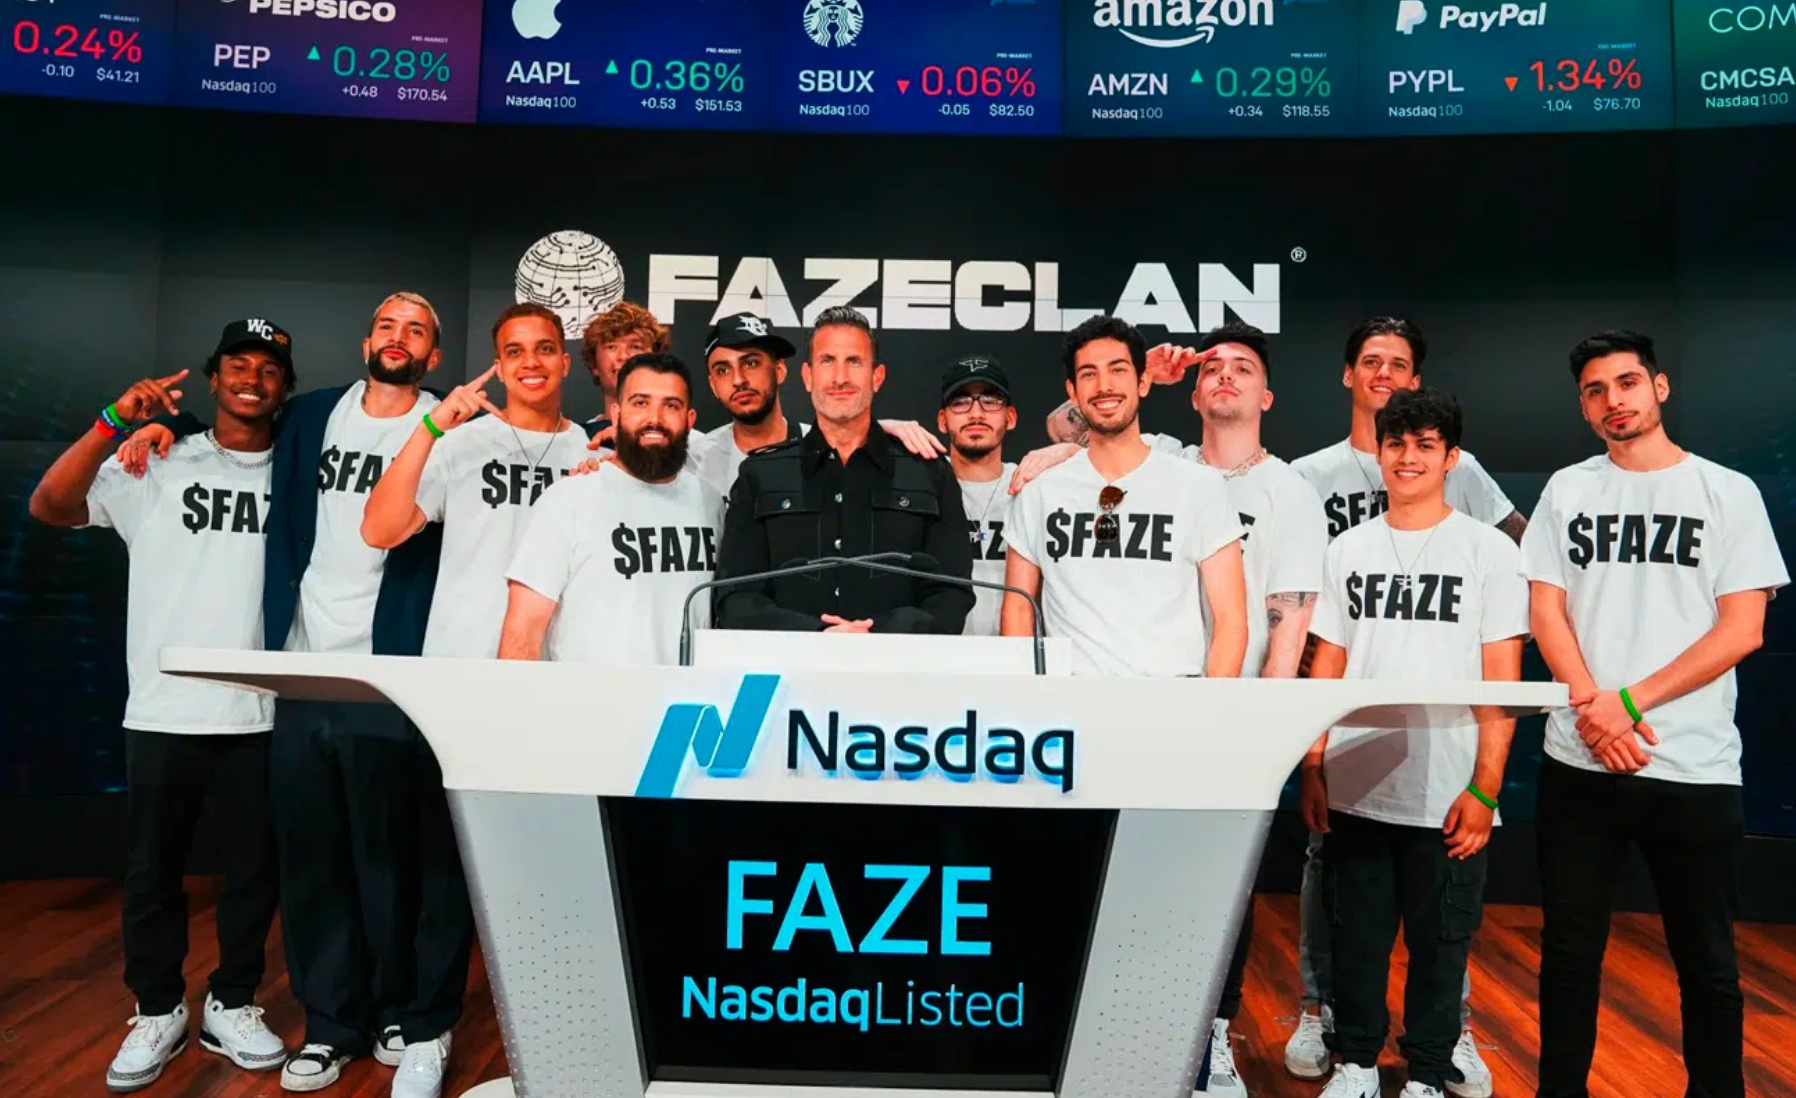 From YouTube To Nasdaq: How FaZe Clan Transformed An eSports Channel Into A Multi-Million-Dollar Business Backed By Pitbull, Offset And Others